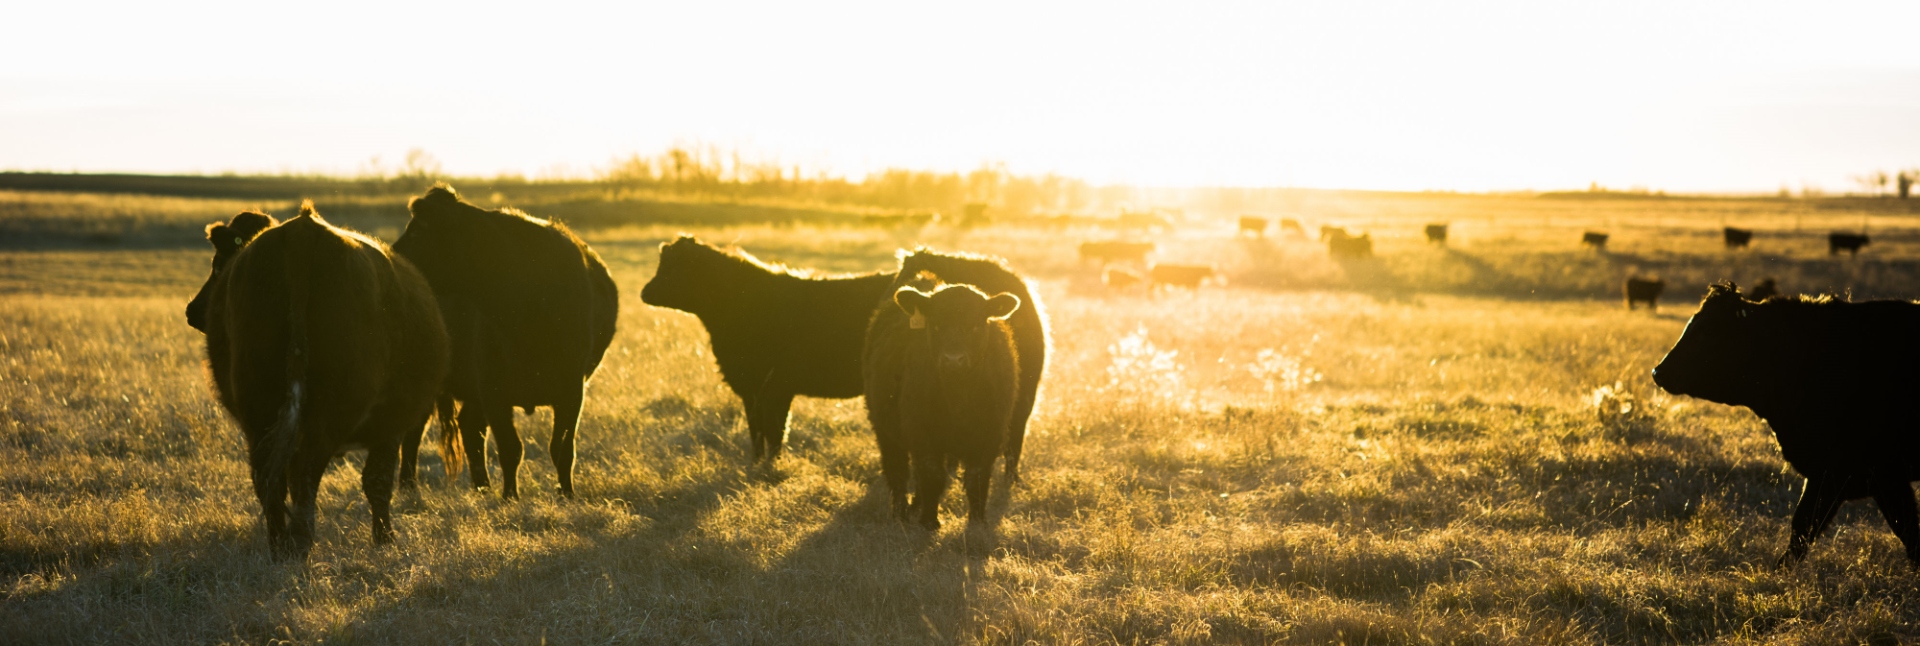 Image of cows in a field during sunrise.